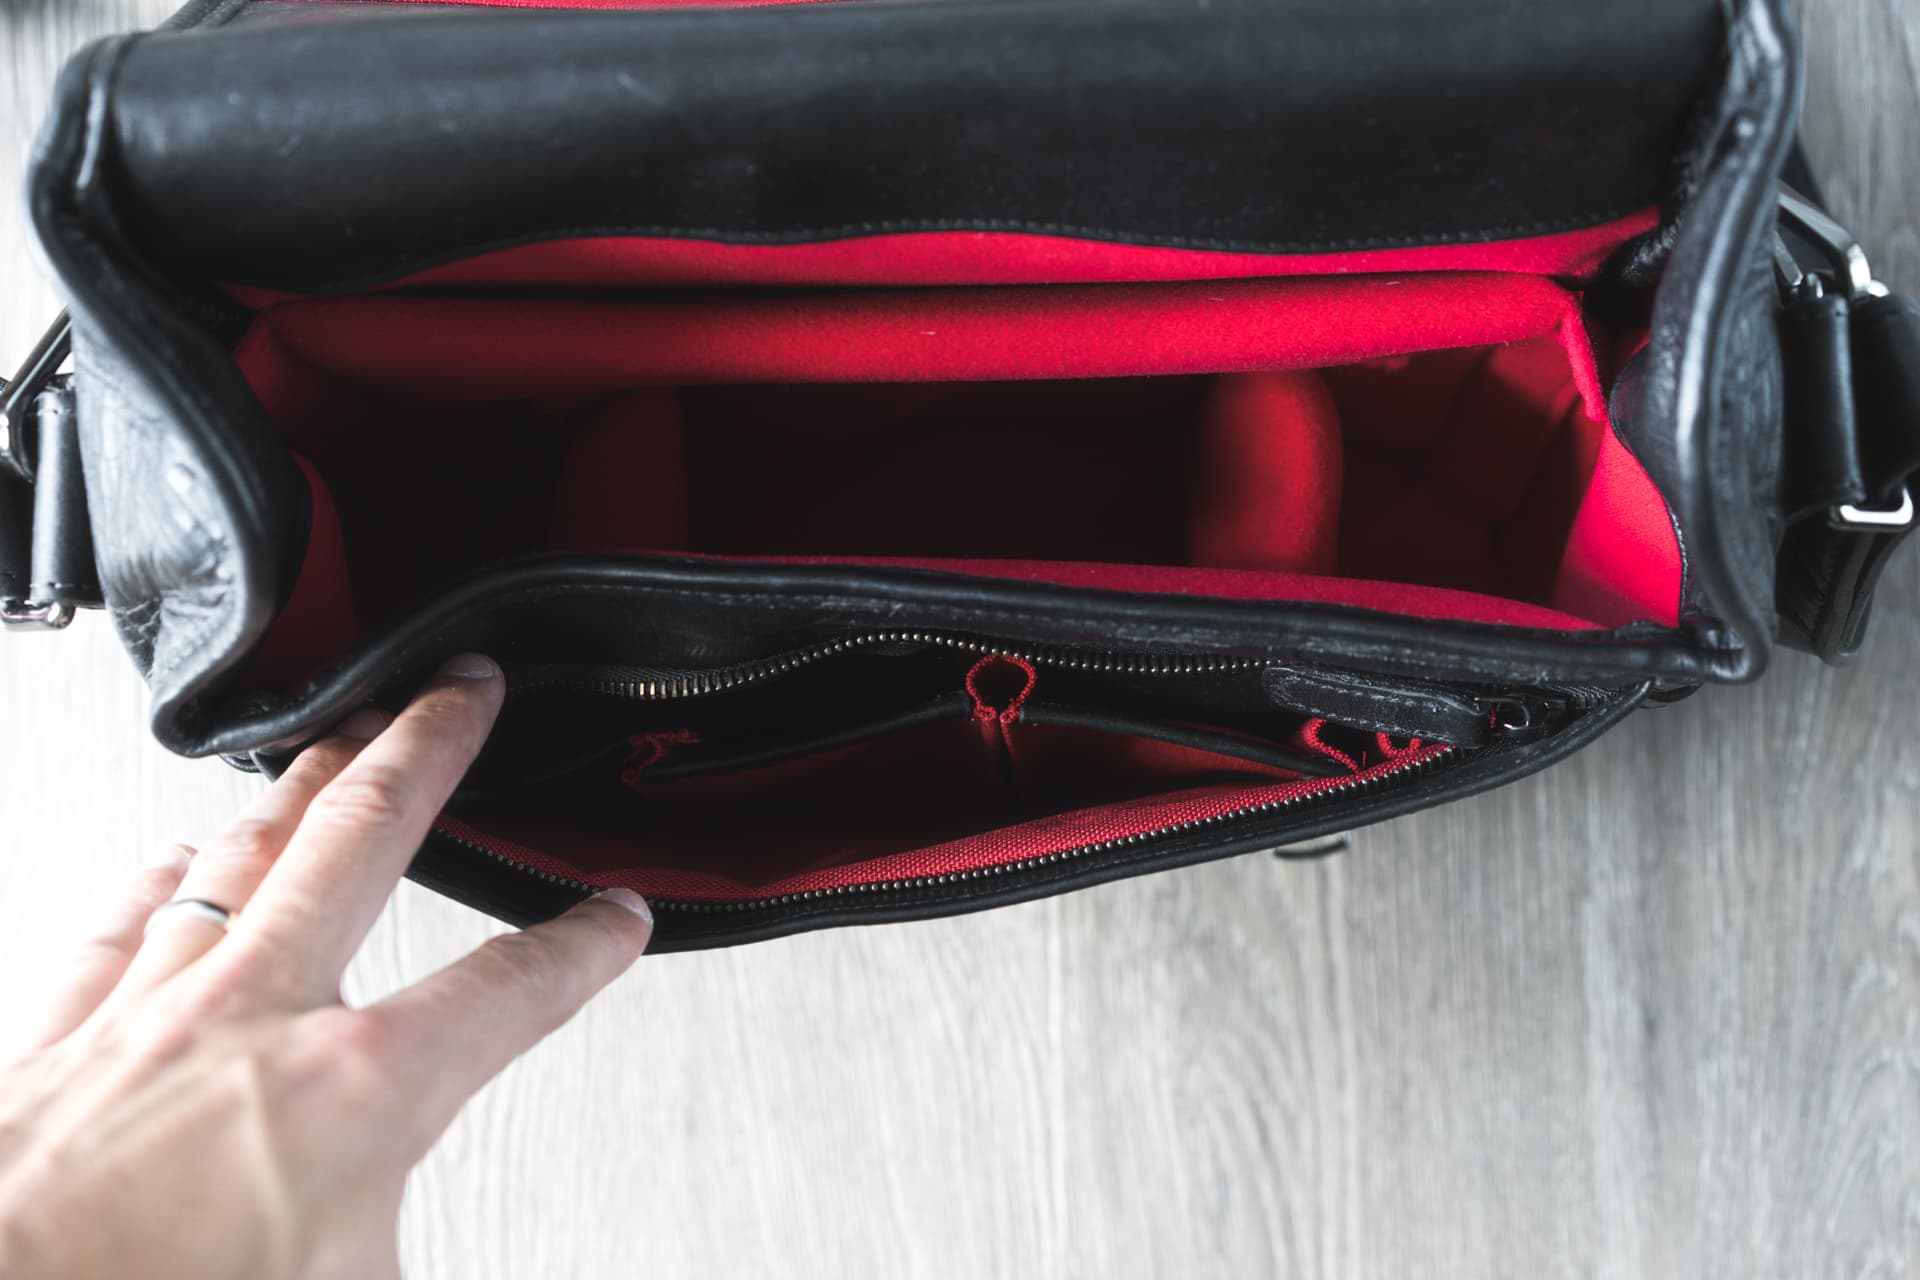 The ONA Berlin II Camera Bag Review — Tools and Toys